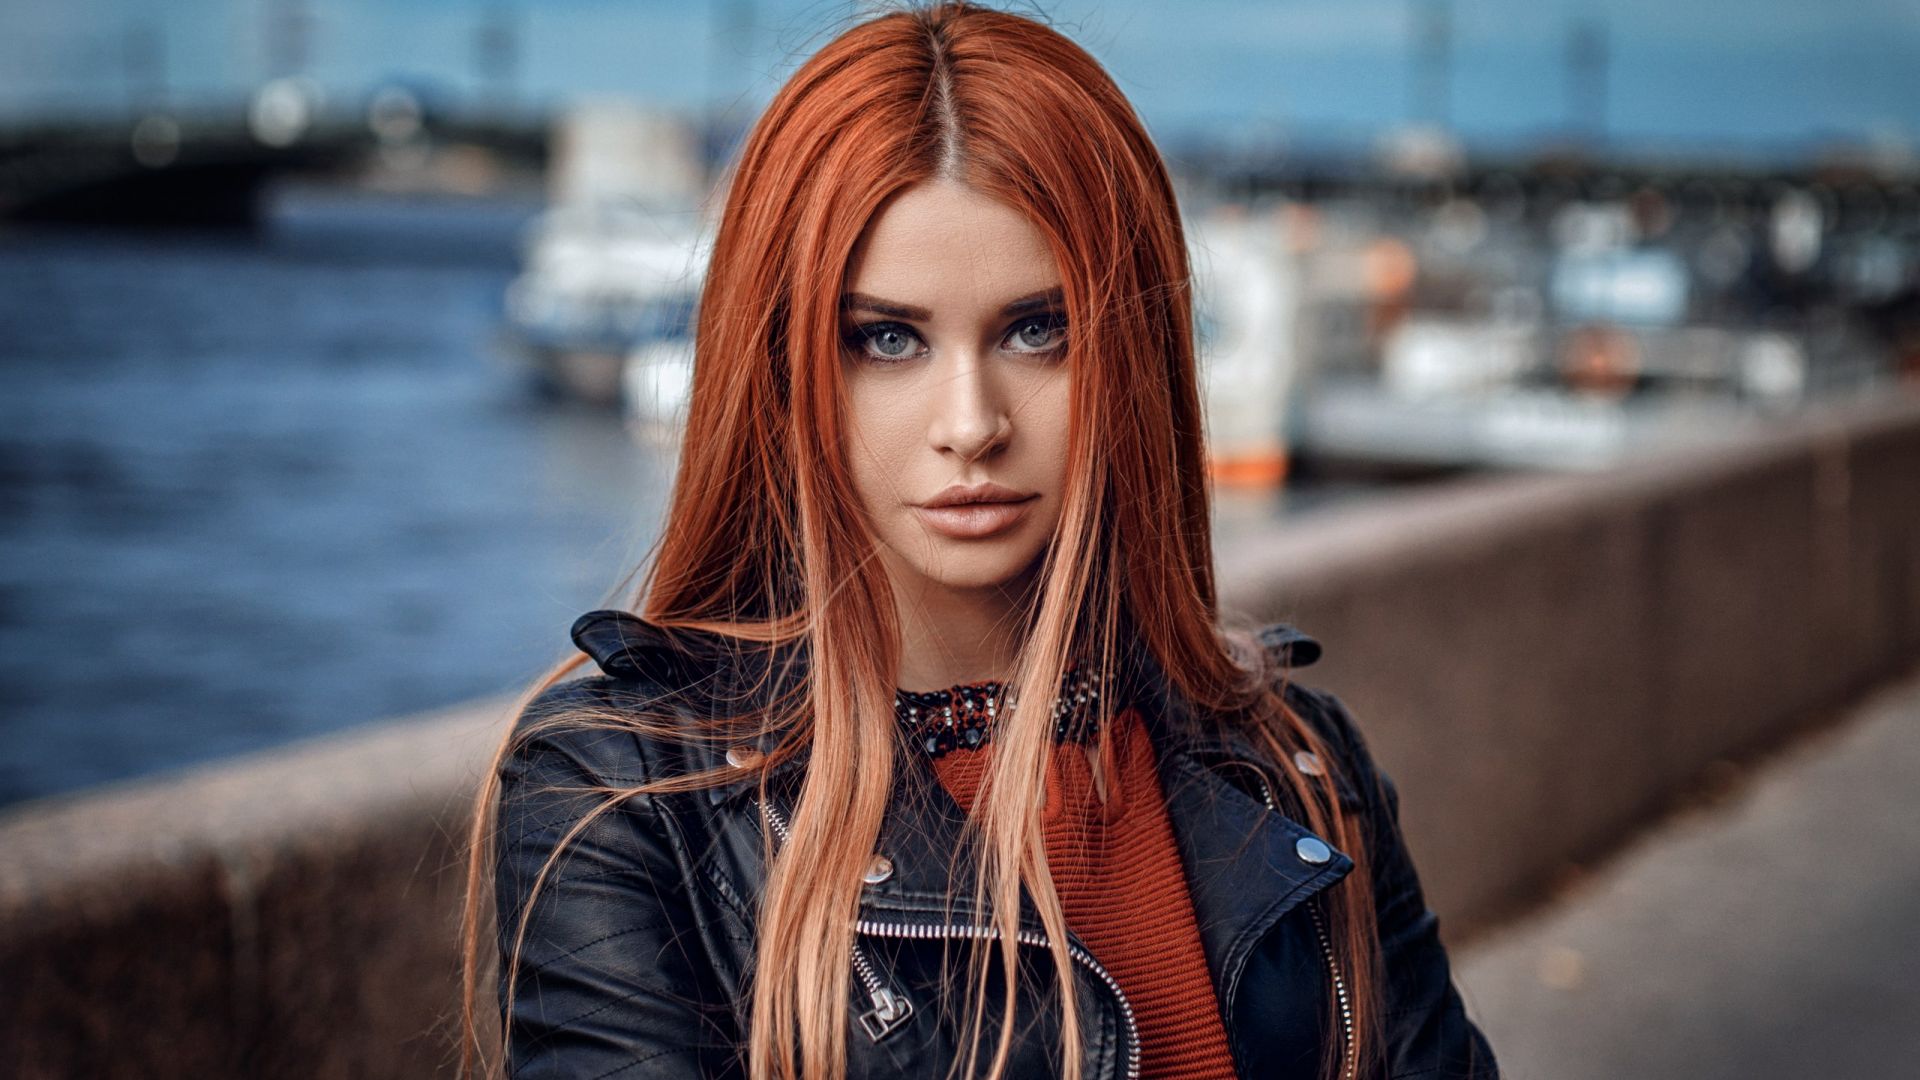 Wallpaper Redhead, harbour, jacket, stare